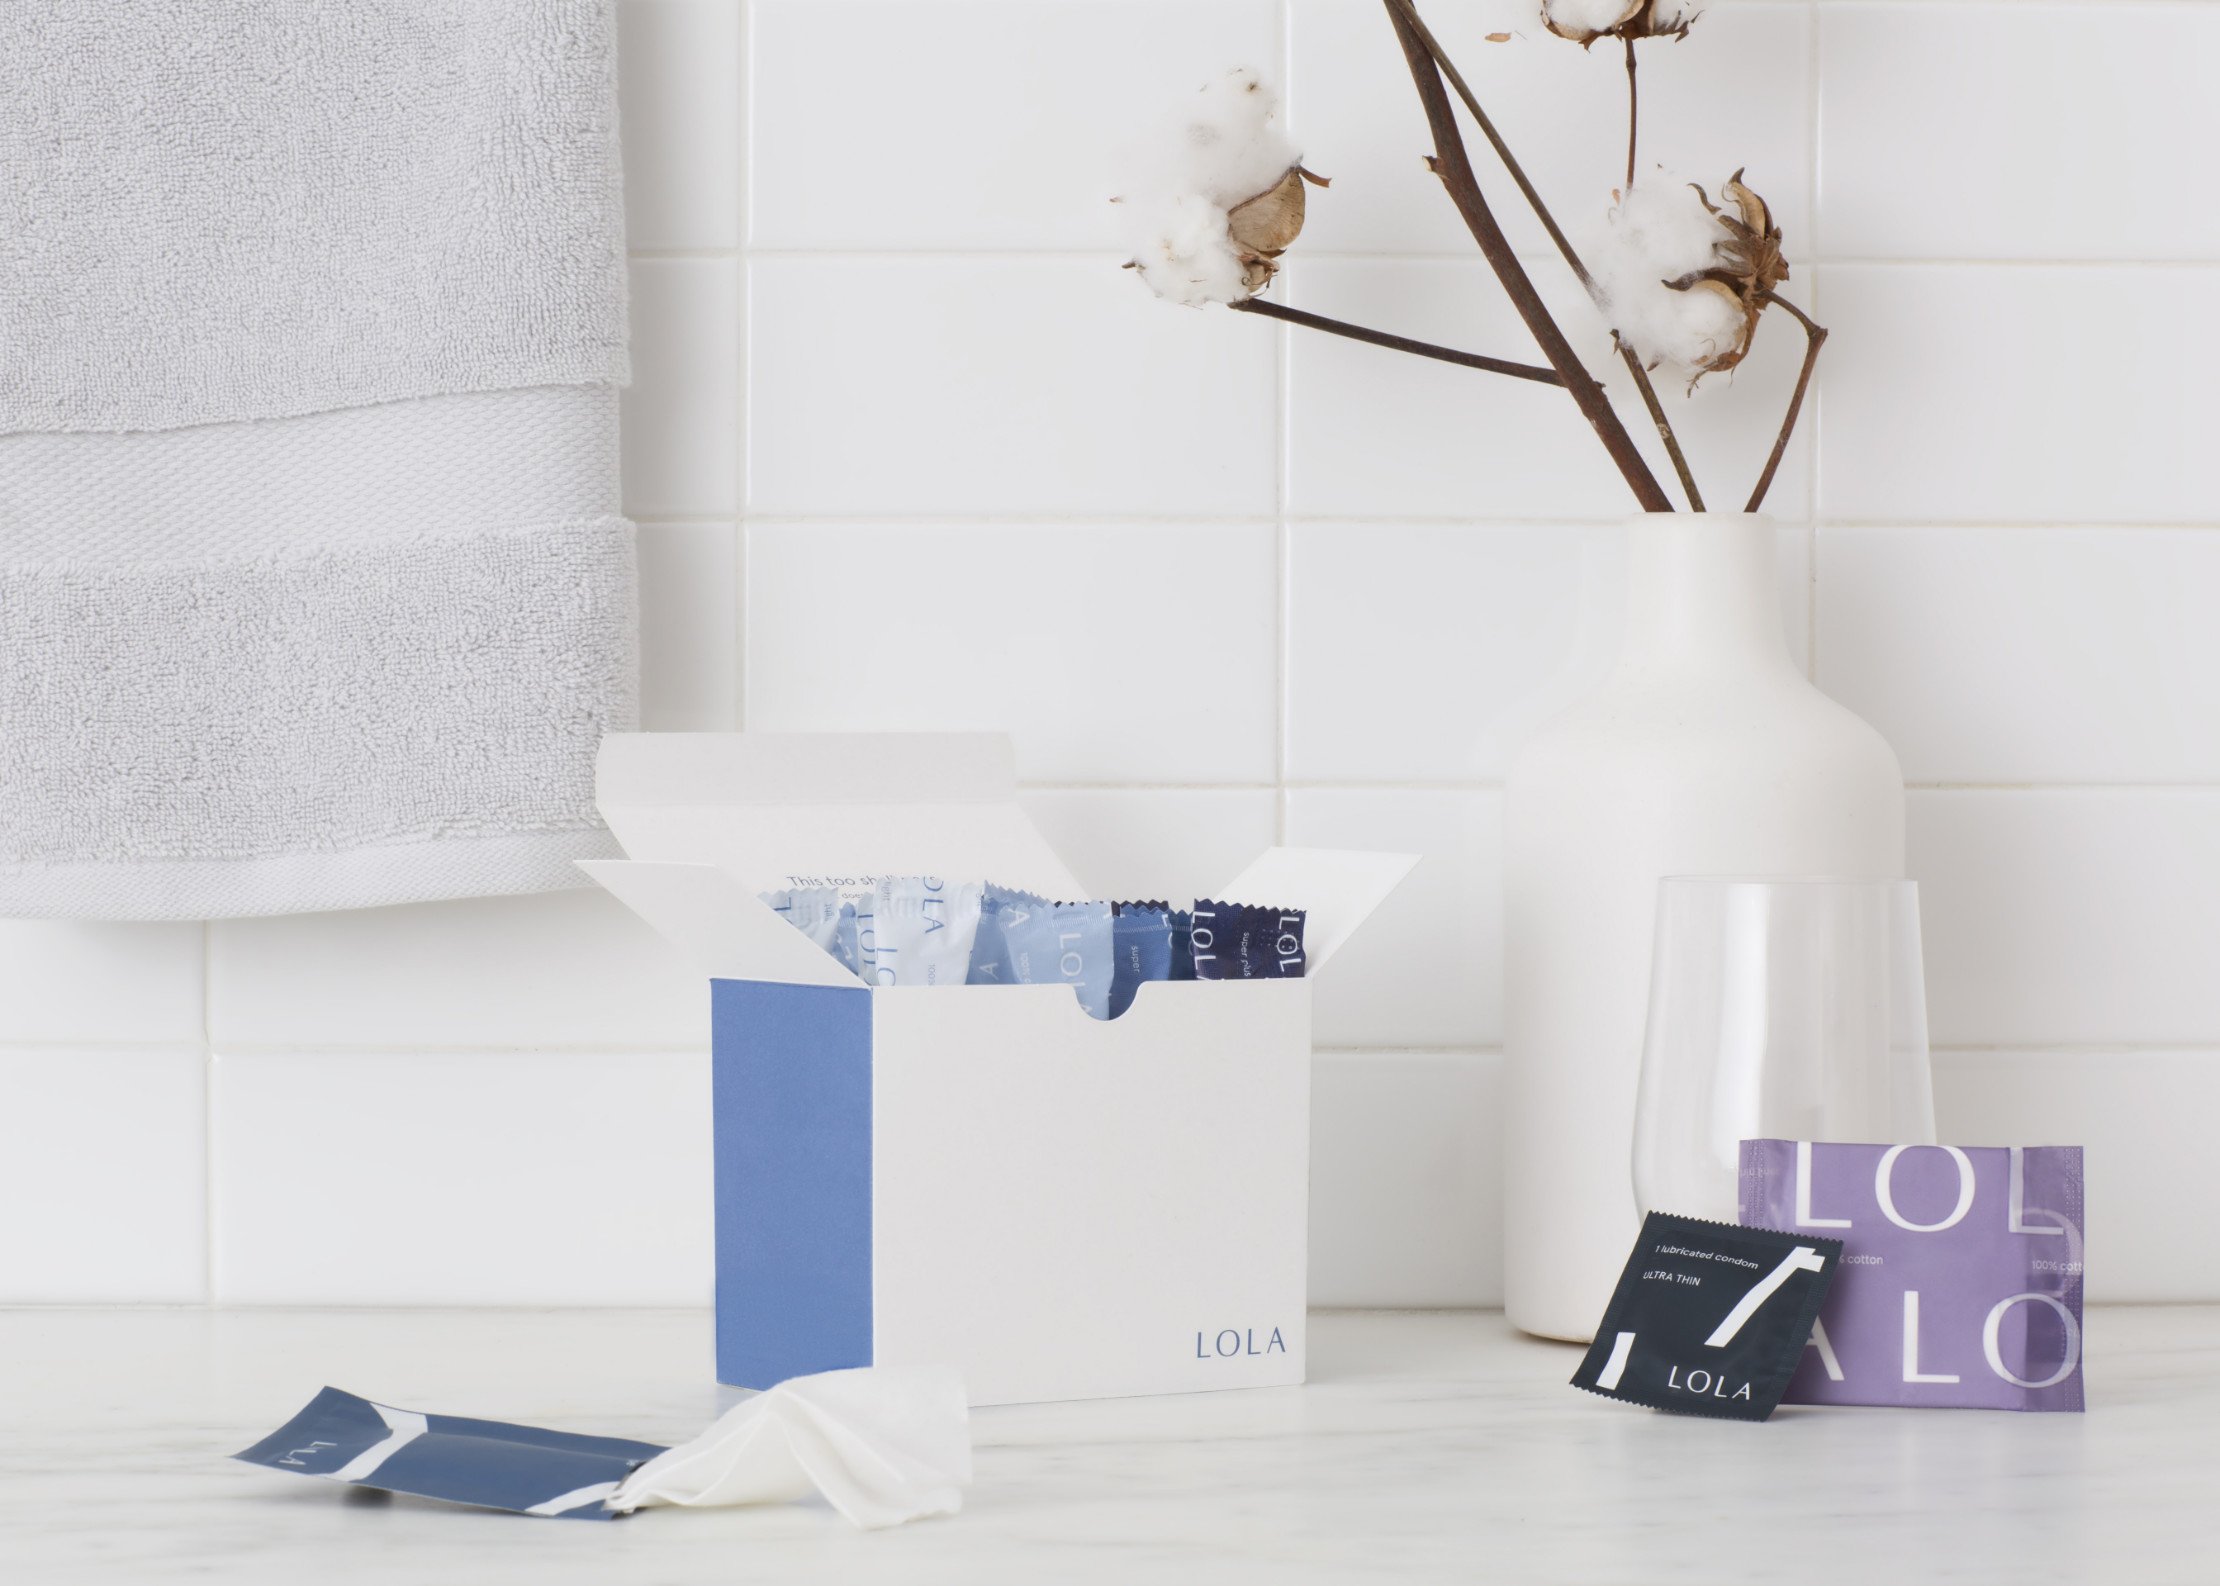 LOLA just raised $24M for a subscription service that ships tampons, pads a...